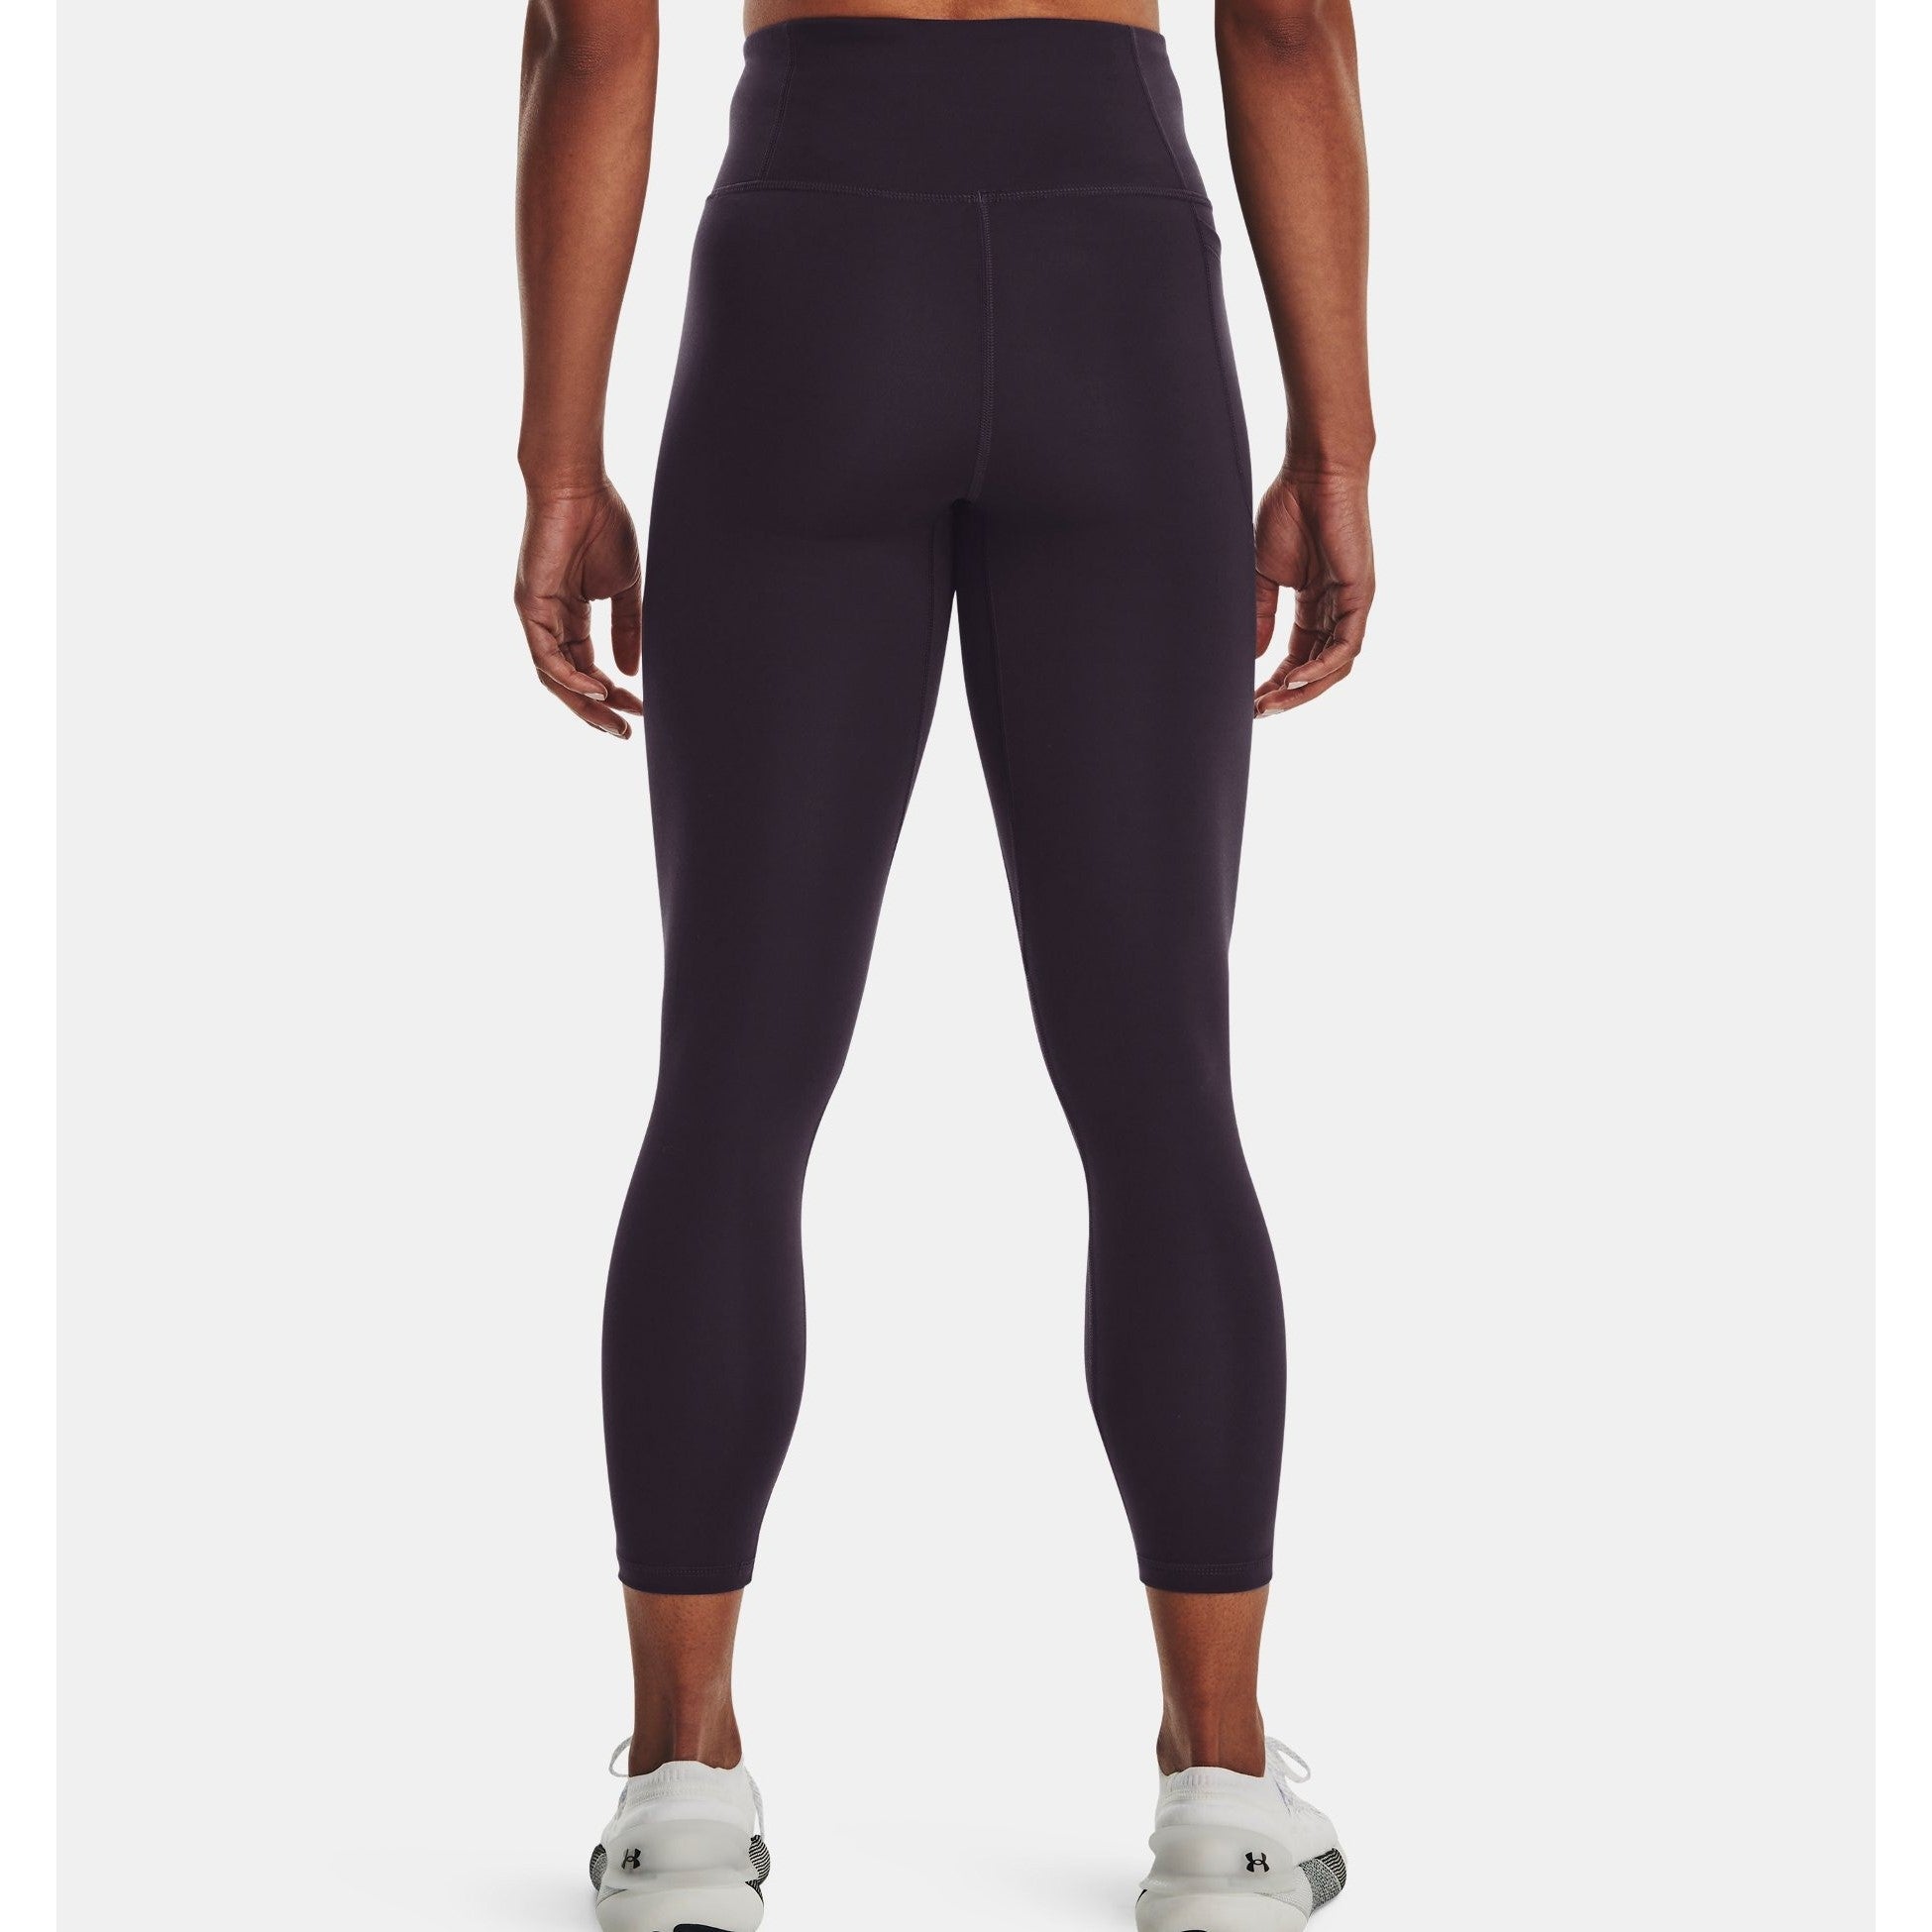 Grey Under Armour Womens HG No-Slip Waistband Ankle Leggings - Get The Label